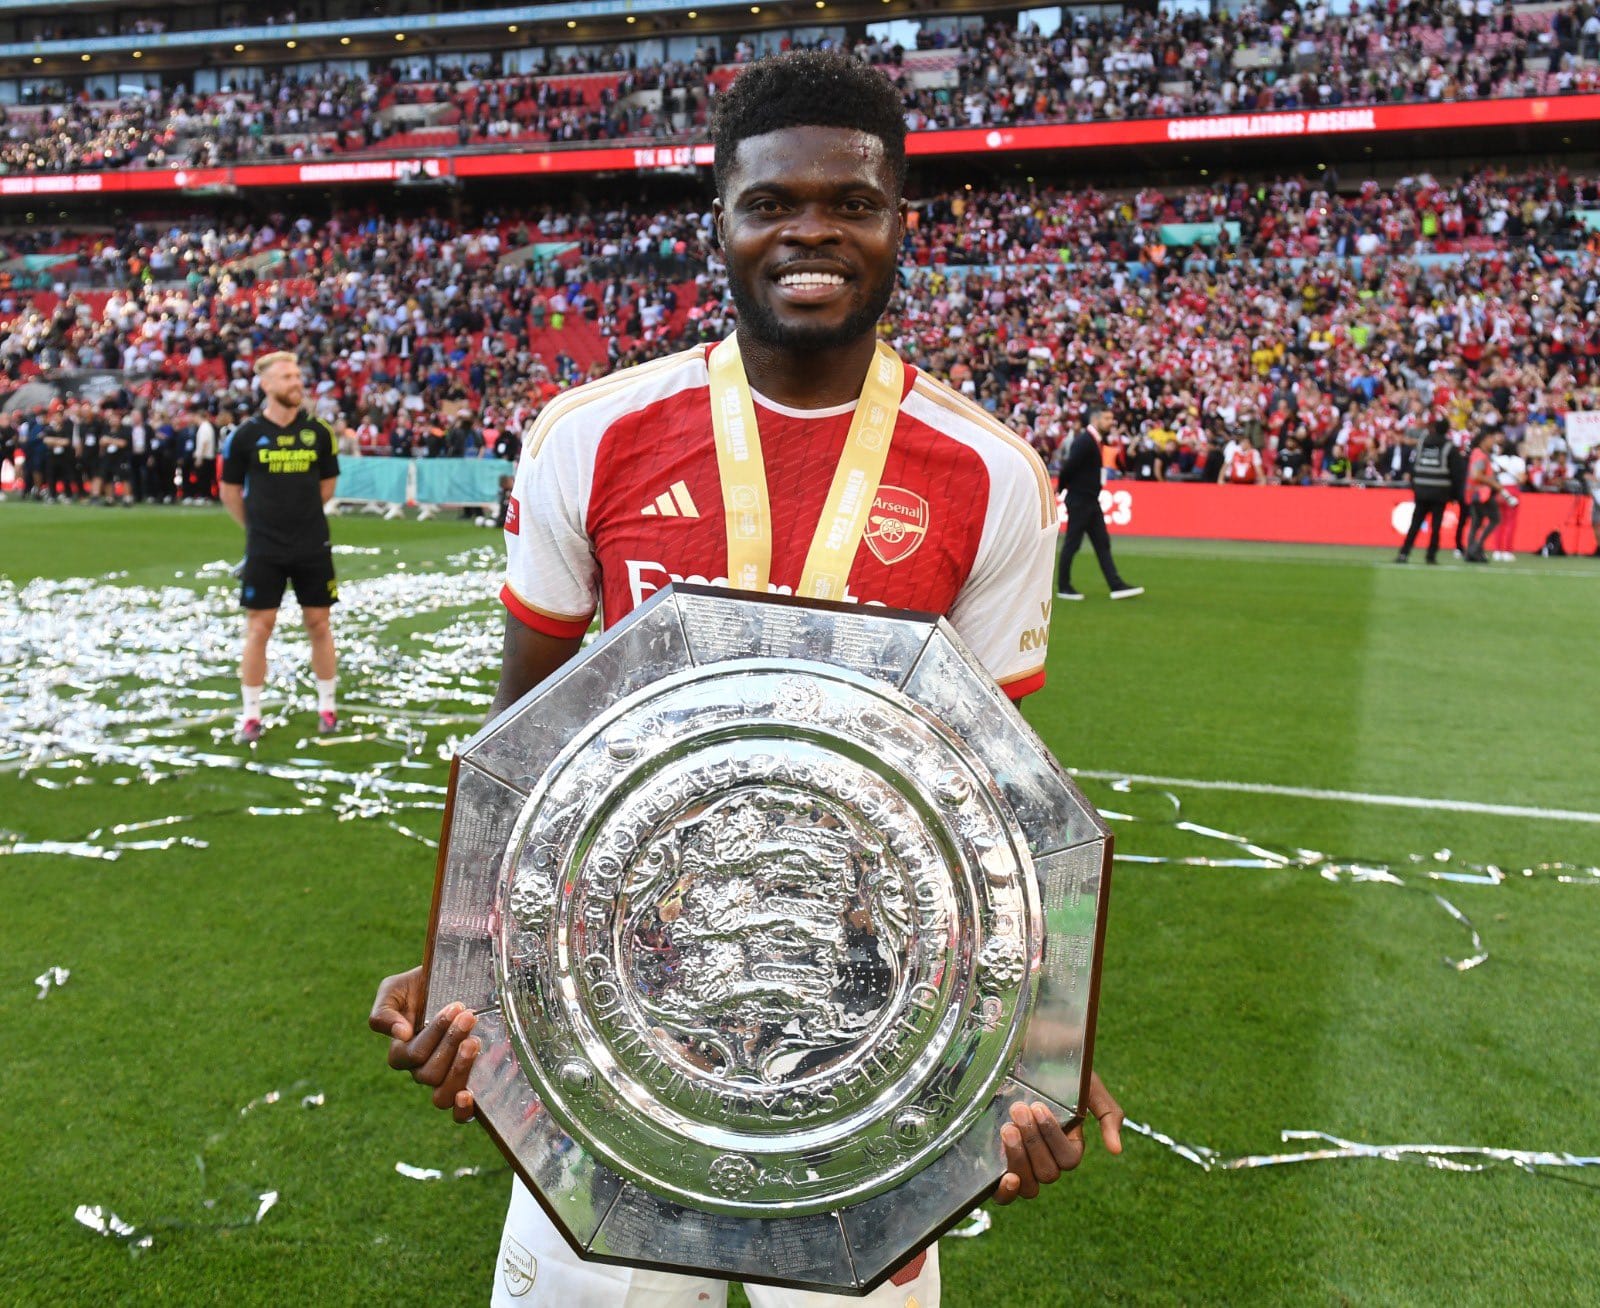 Thomas Partey: I joined Arsenal to test myself in the Premier League